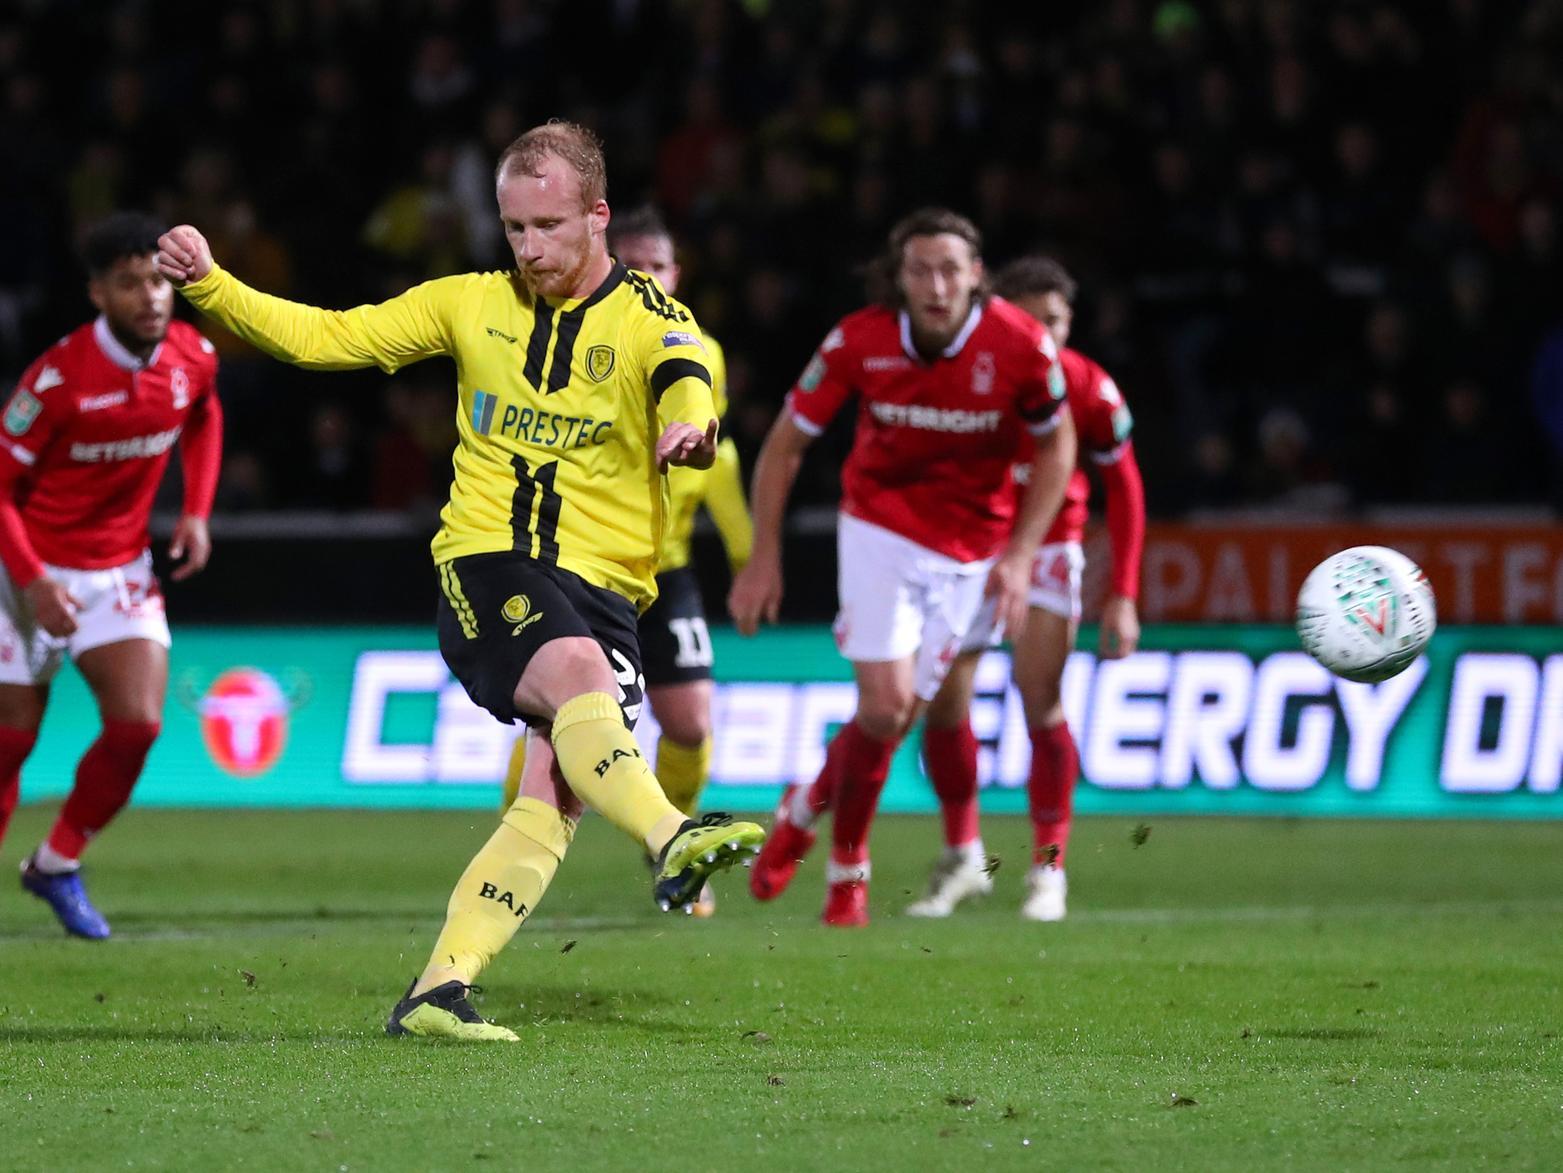 Burton midfielder Liam Boyce has been linked with a move to Sunderland. (The Sun)